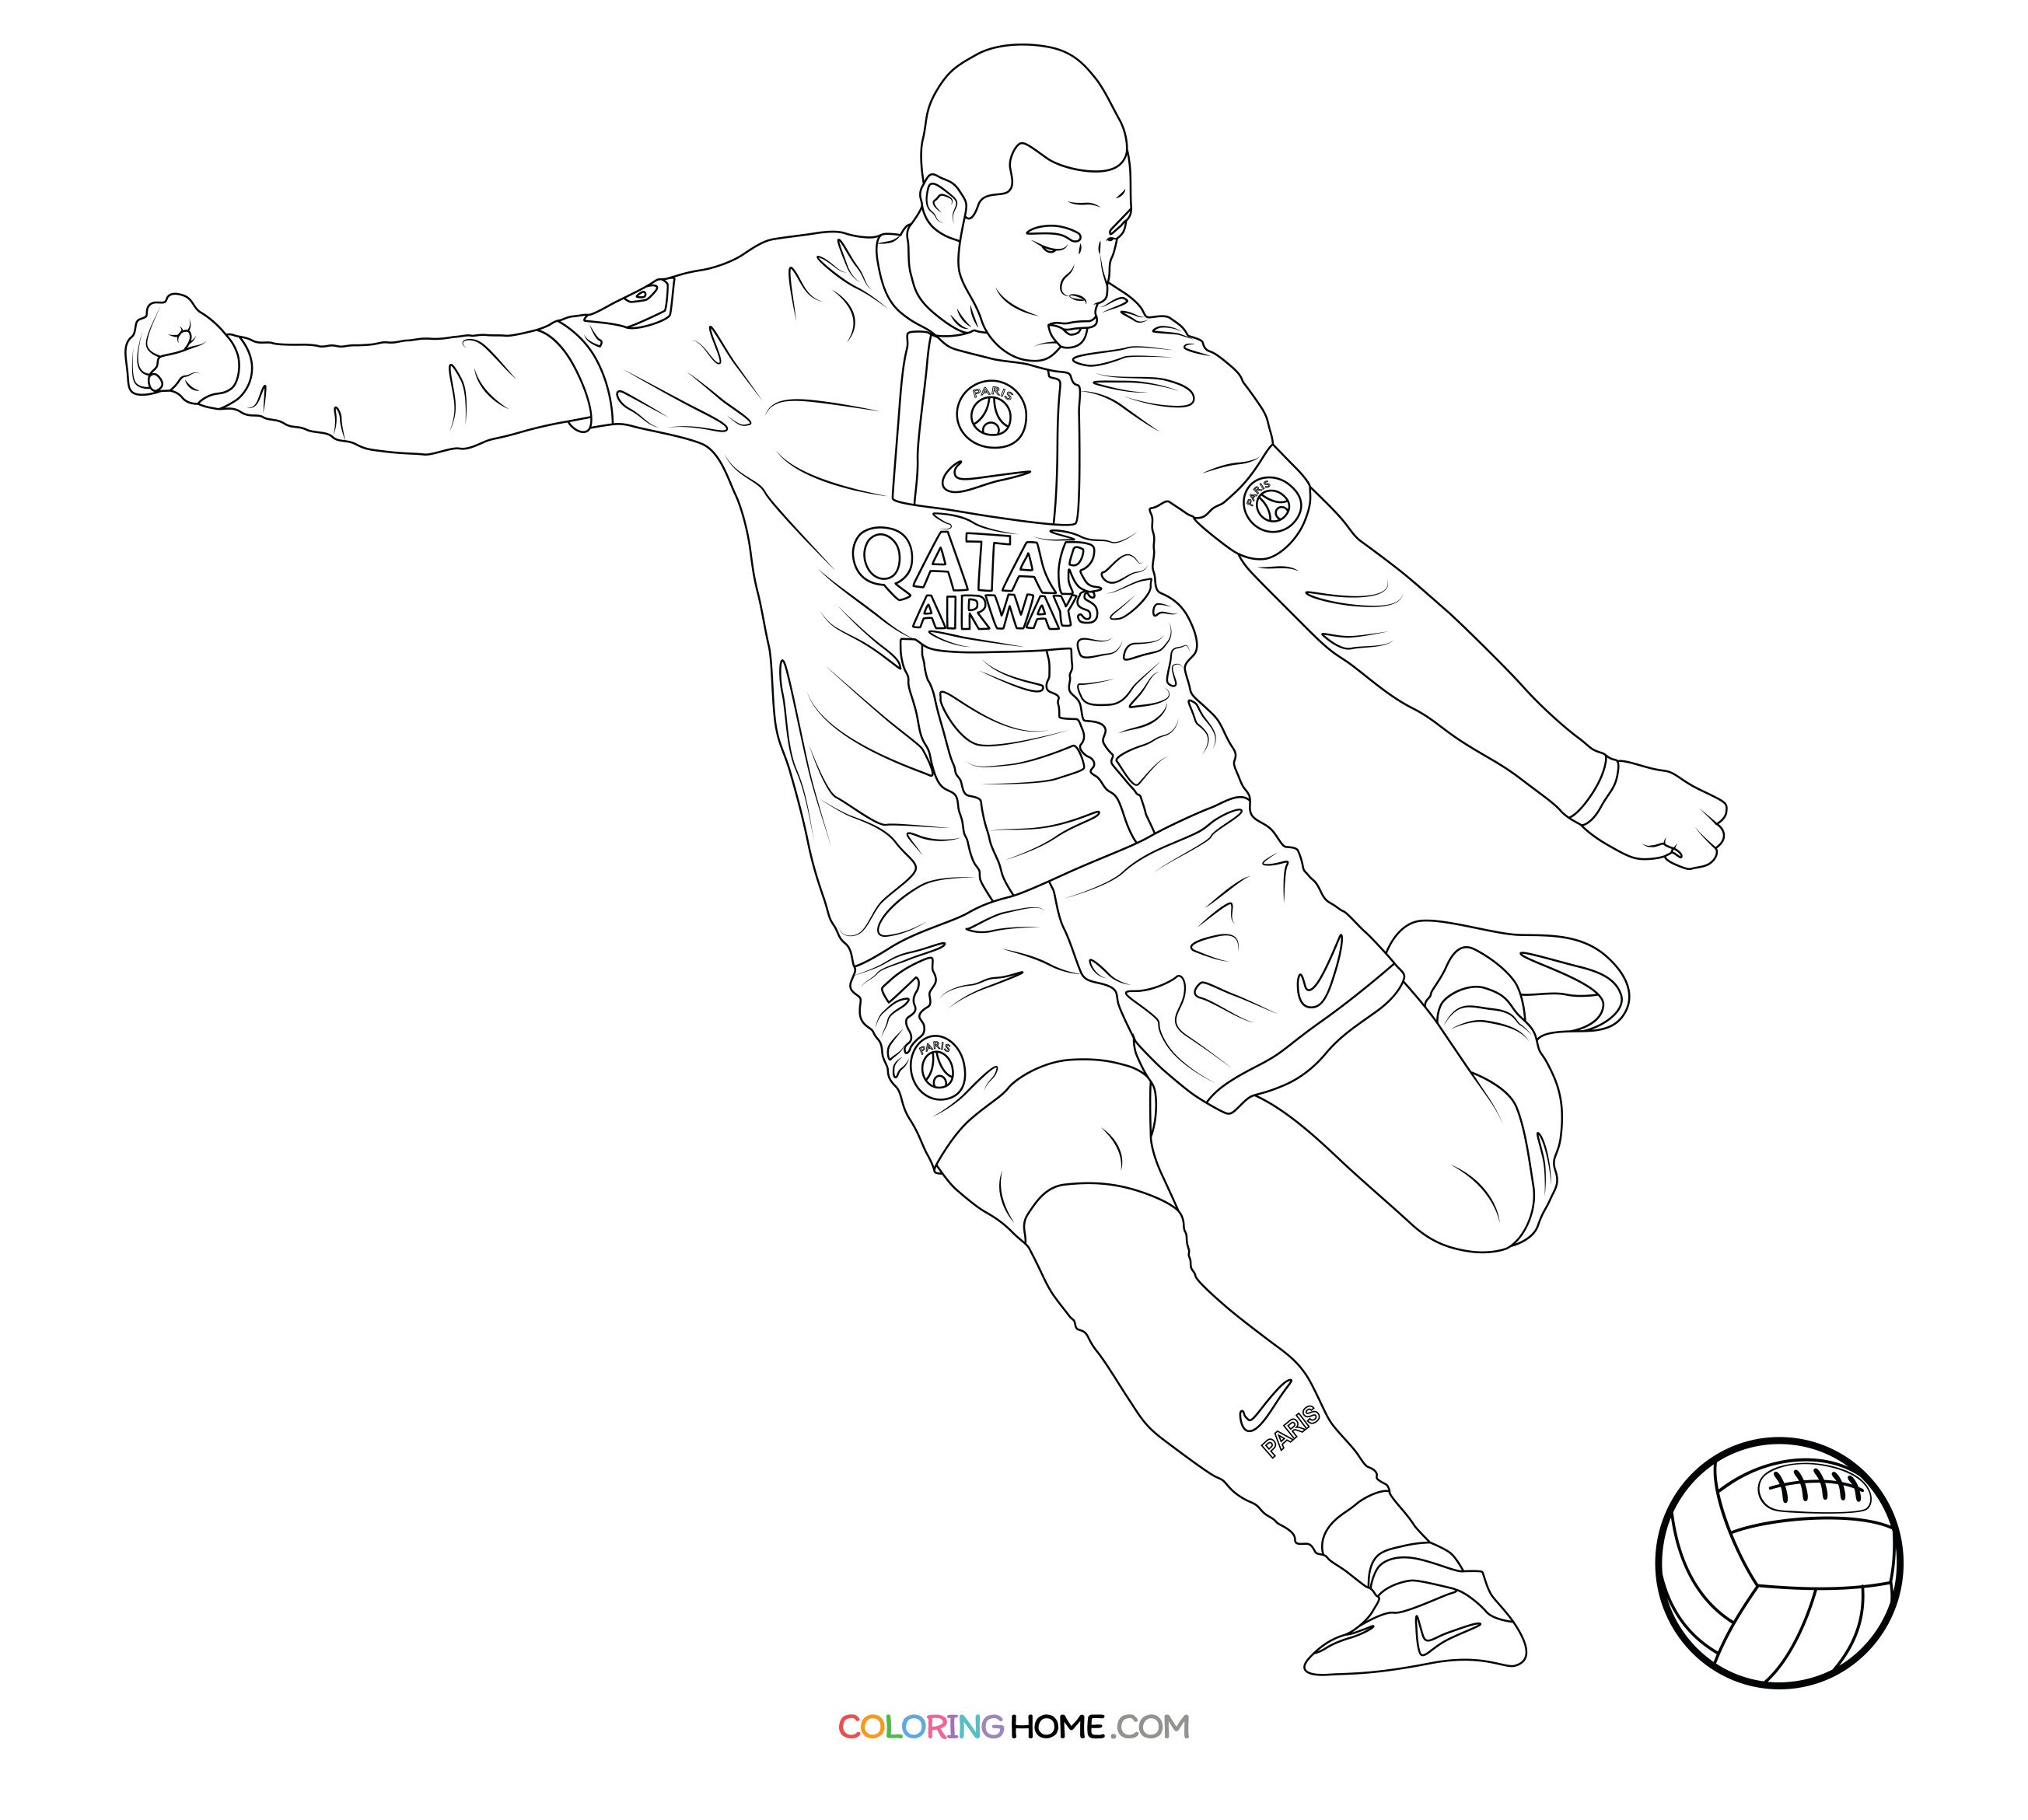 Mbappe coloring page